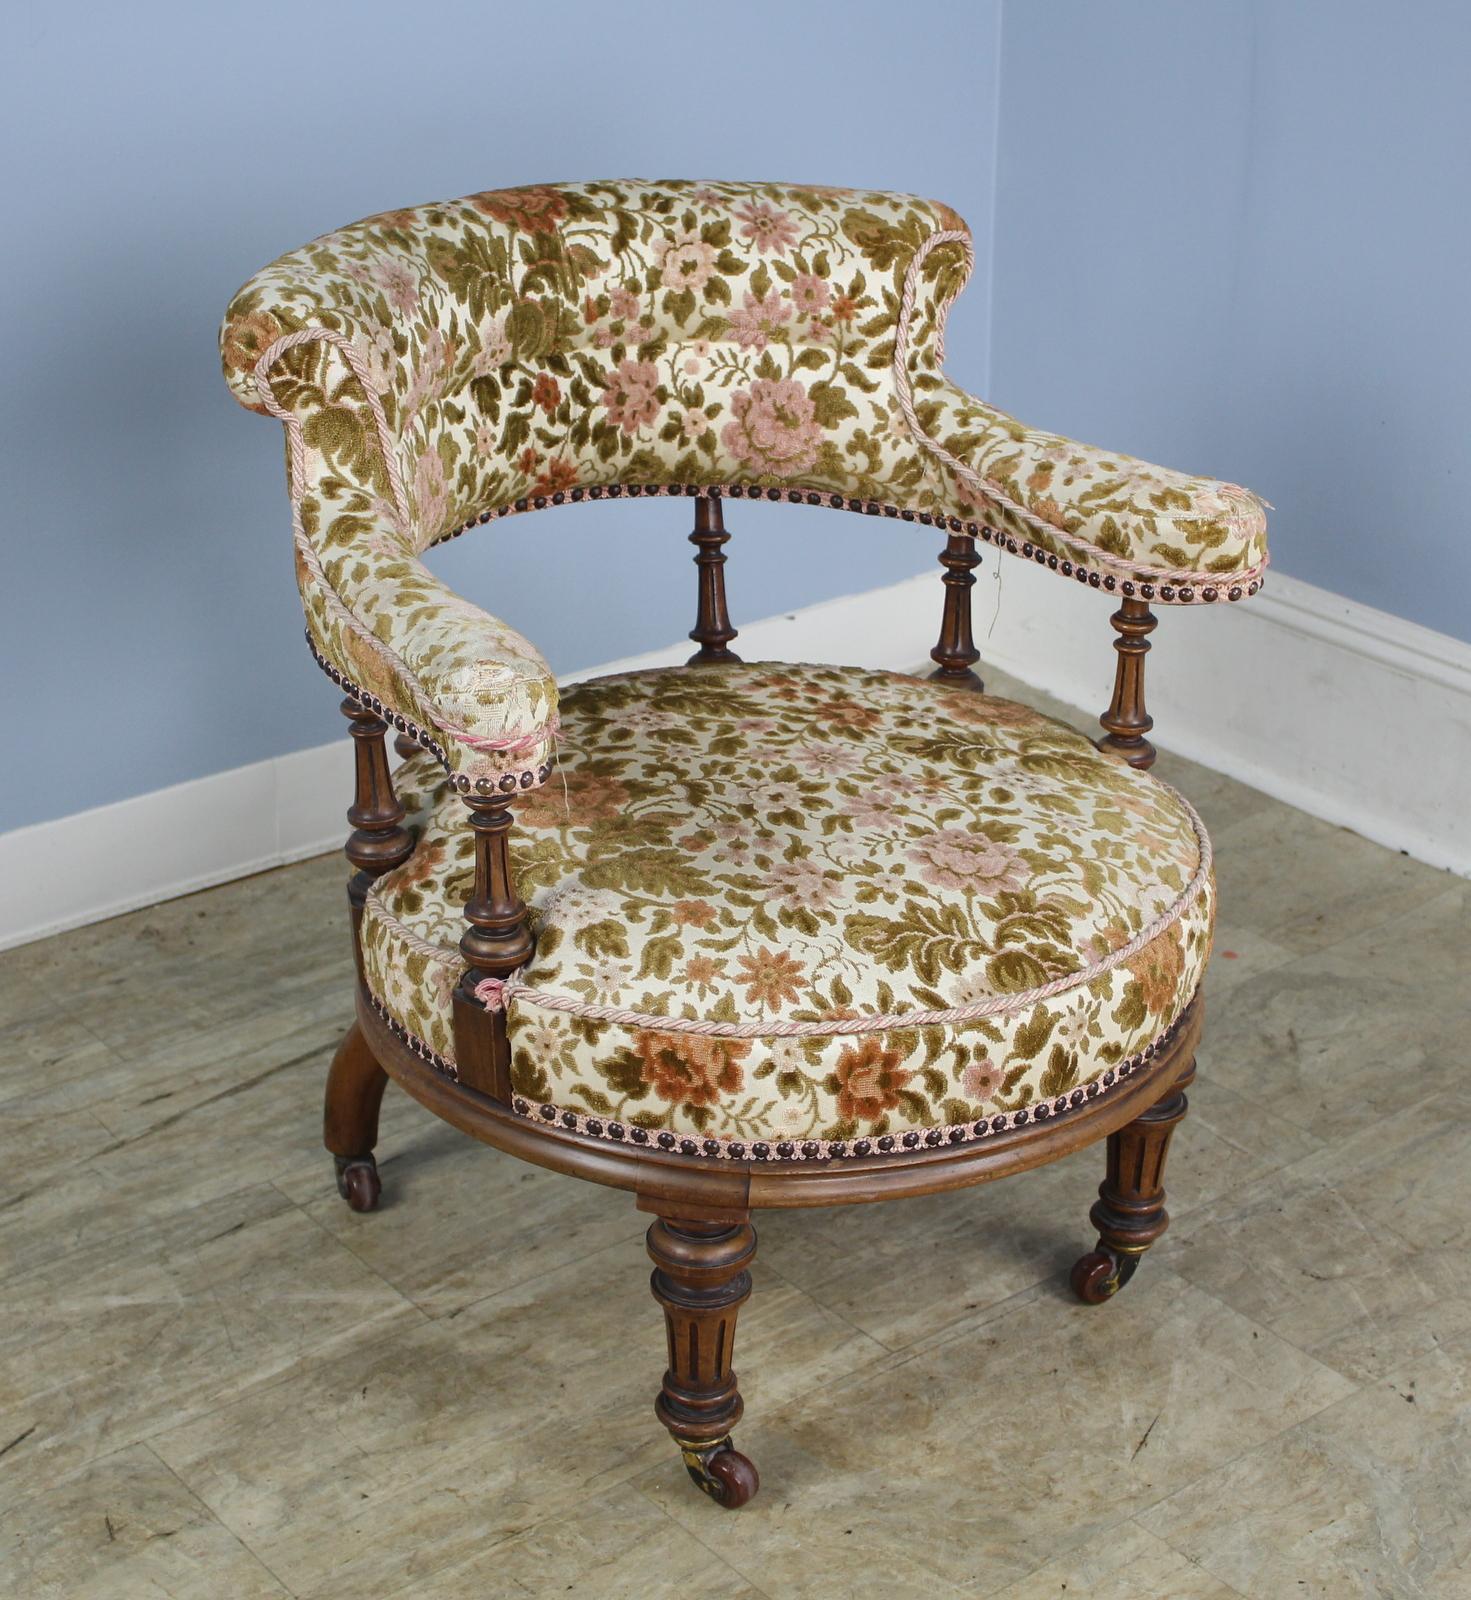 Lovely little 19th century easy chair with charming turned legs. Original castors. Floral upholstery is worn. The piece is ready for reupholstery.